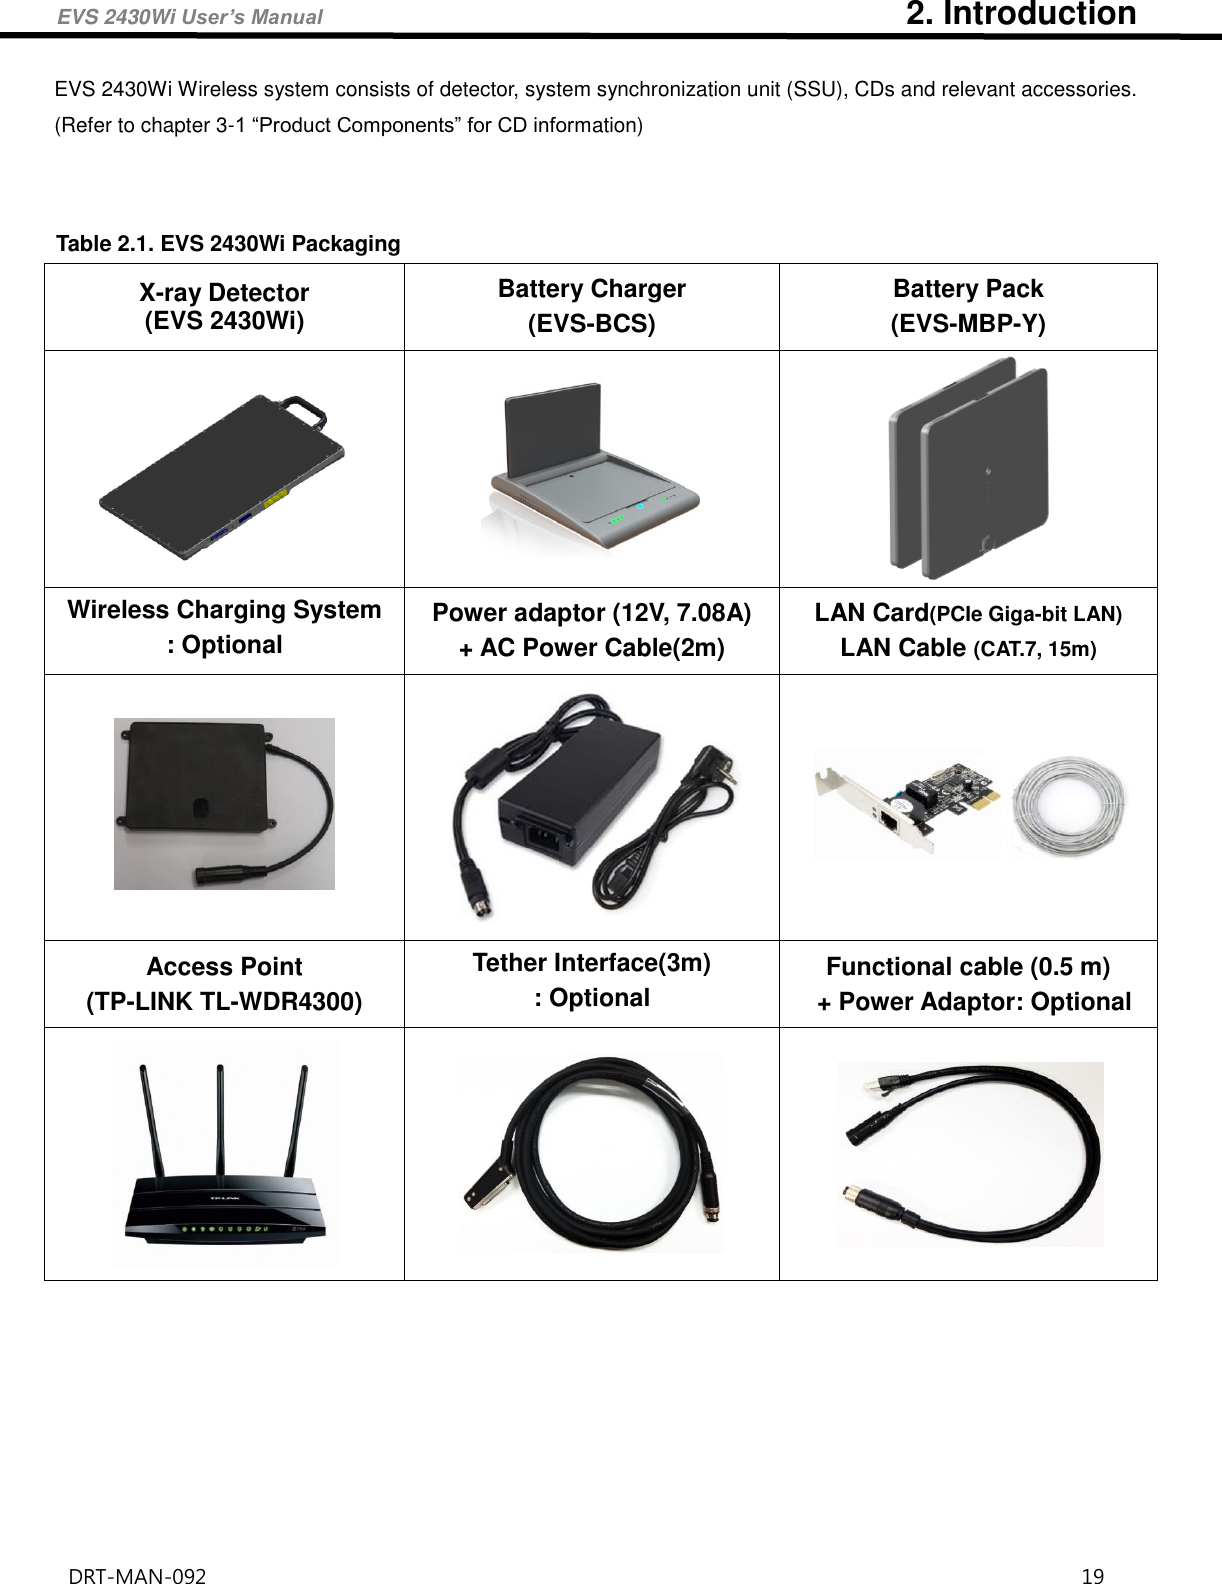 EVS 2430Wi User’s Manual                                   2. Introduction DRT-MAN-092                                                                                    19   EVS 2430Wi Wireless system consists of detector, system synchronization unit (SSU), CDs and relevant accessories. (Refer to chapter 3-1 “Product Components” for CD information)    Table 2.1. EVS 2430Wi Packaging X-ray Detector (EVS 2430Wi) Battery Charger (EVS-BCS) Battery Pack (EVS-MBP-Y)    Wireless Charging System : Optional Power adaptor (12V, 7.08A) + AC Power Cable(2m) LAN Card(PCIe Giga-bit LAN) LAN Cable (CAT.7, 15m)    Access Point (TP-LINK TL-WDR4300) Tether Interface(3m)   : Optional Functional cable (0.5 m)   + Power Adaptor: Optional        